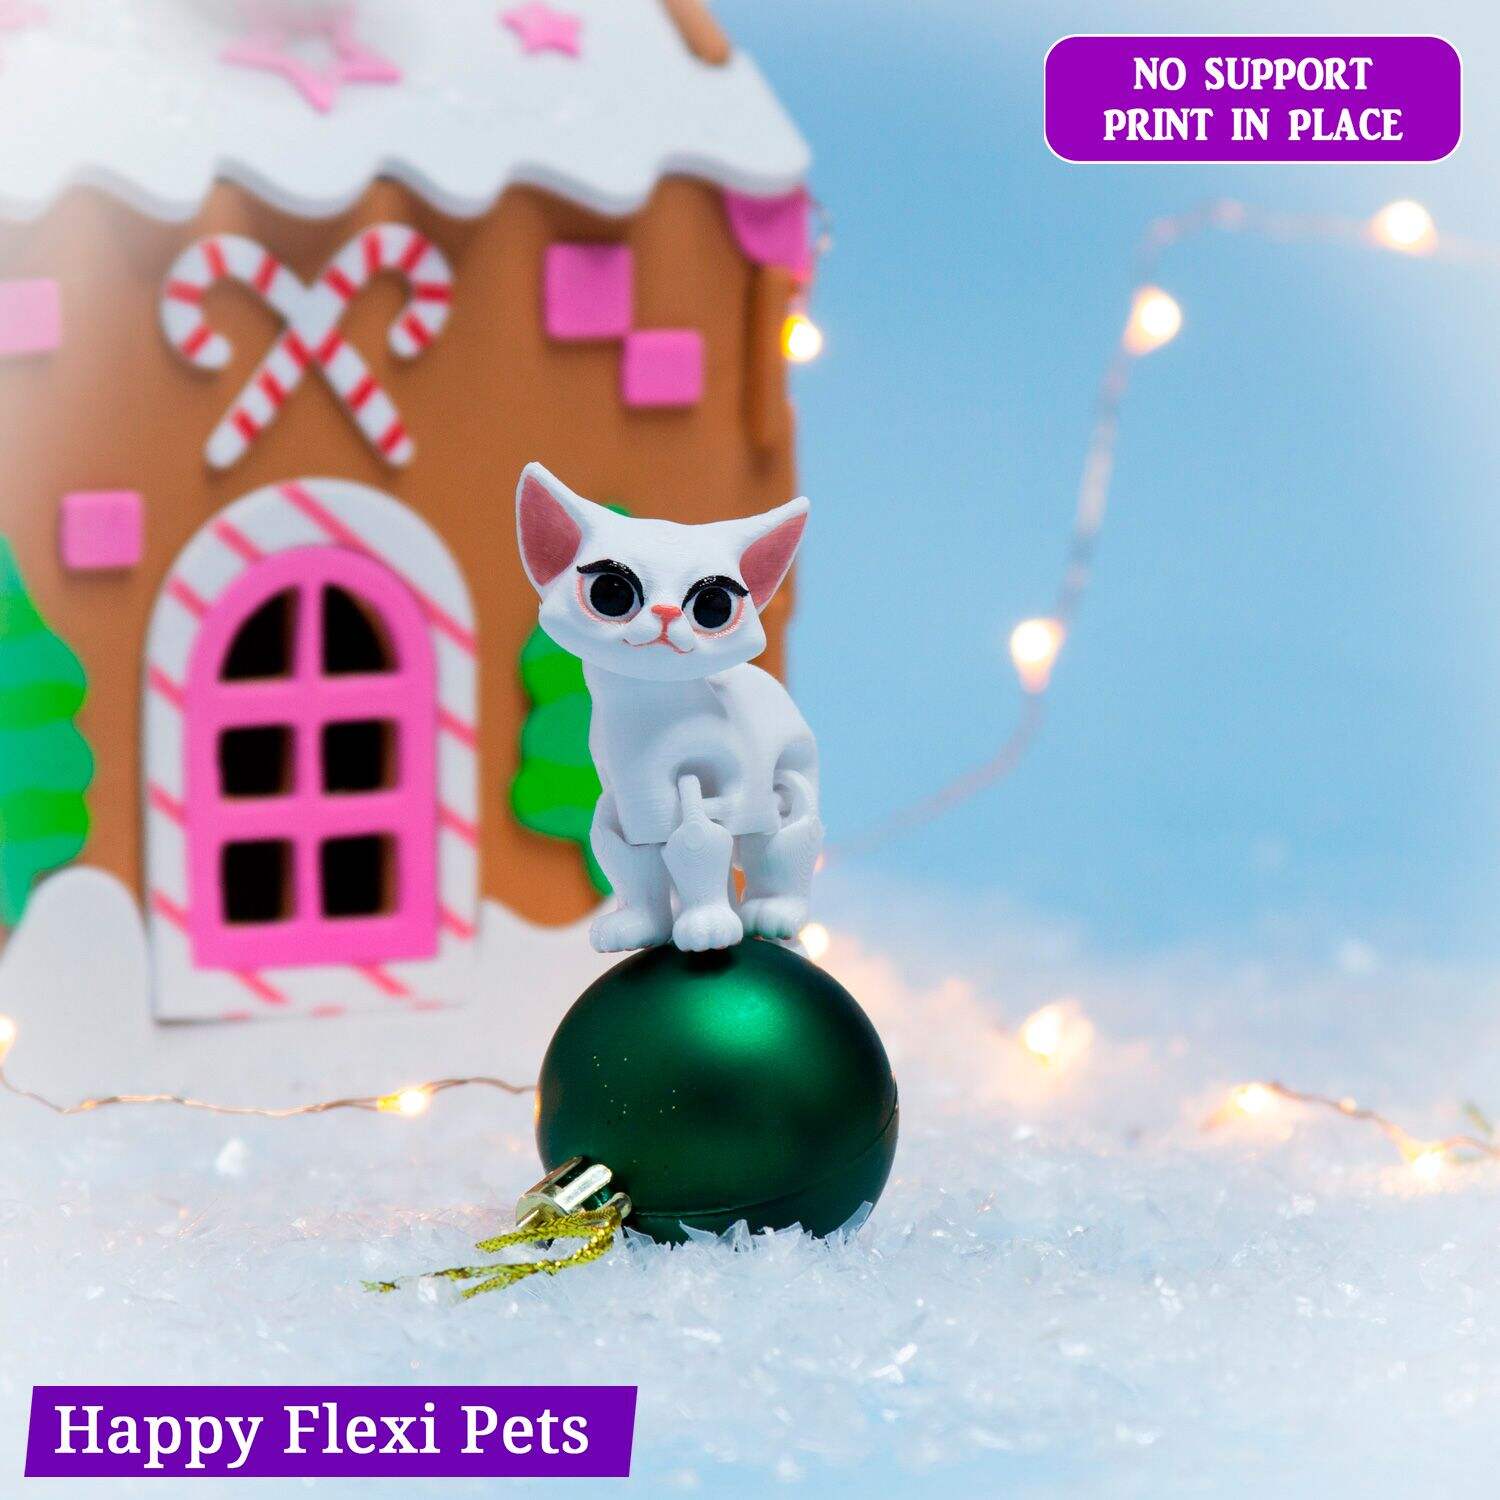 Snowflake the kitten articulated toy by Happy Flexi pets